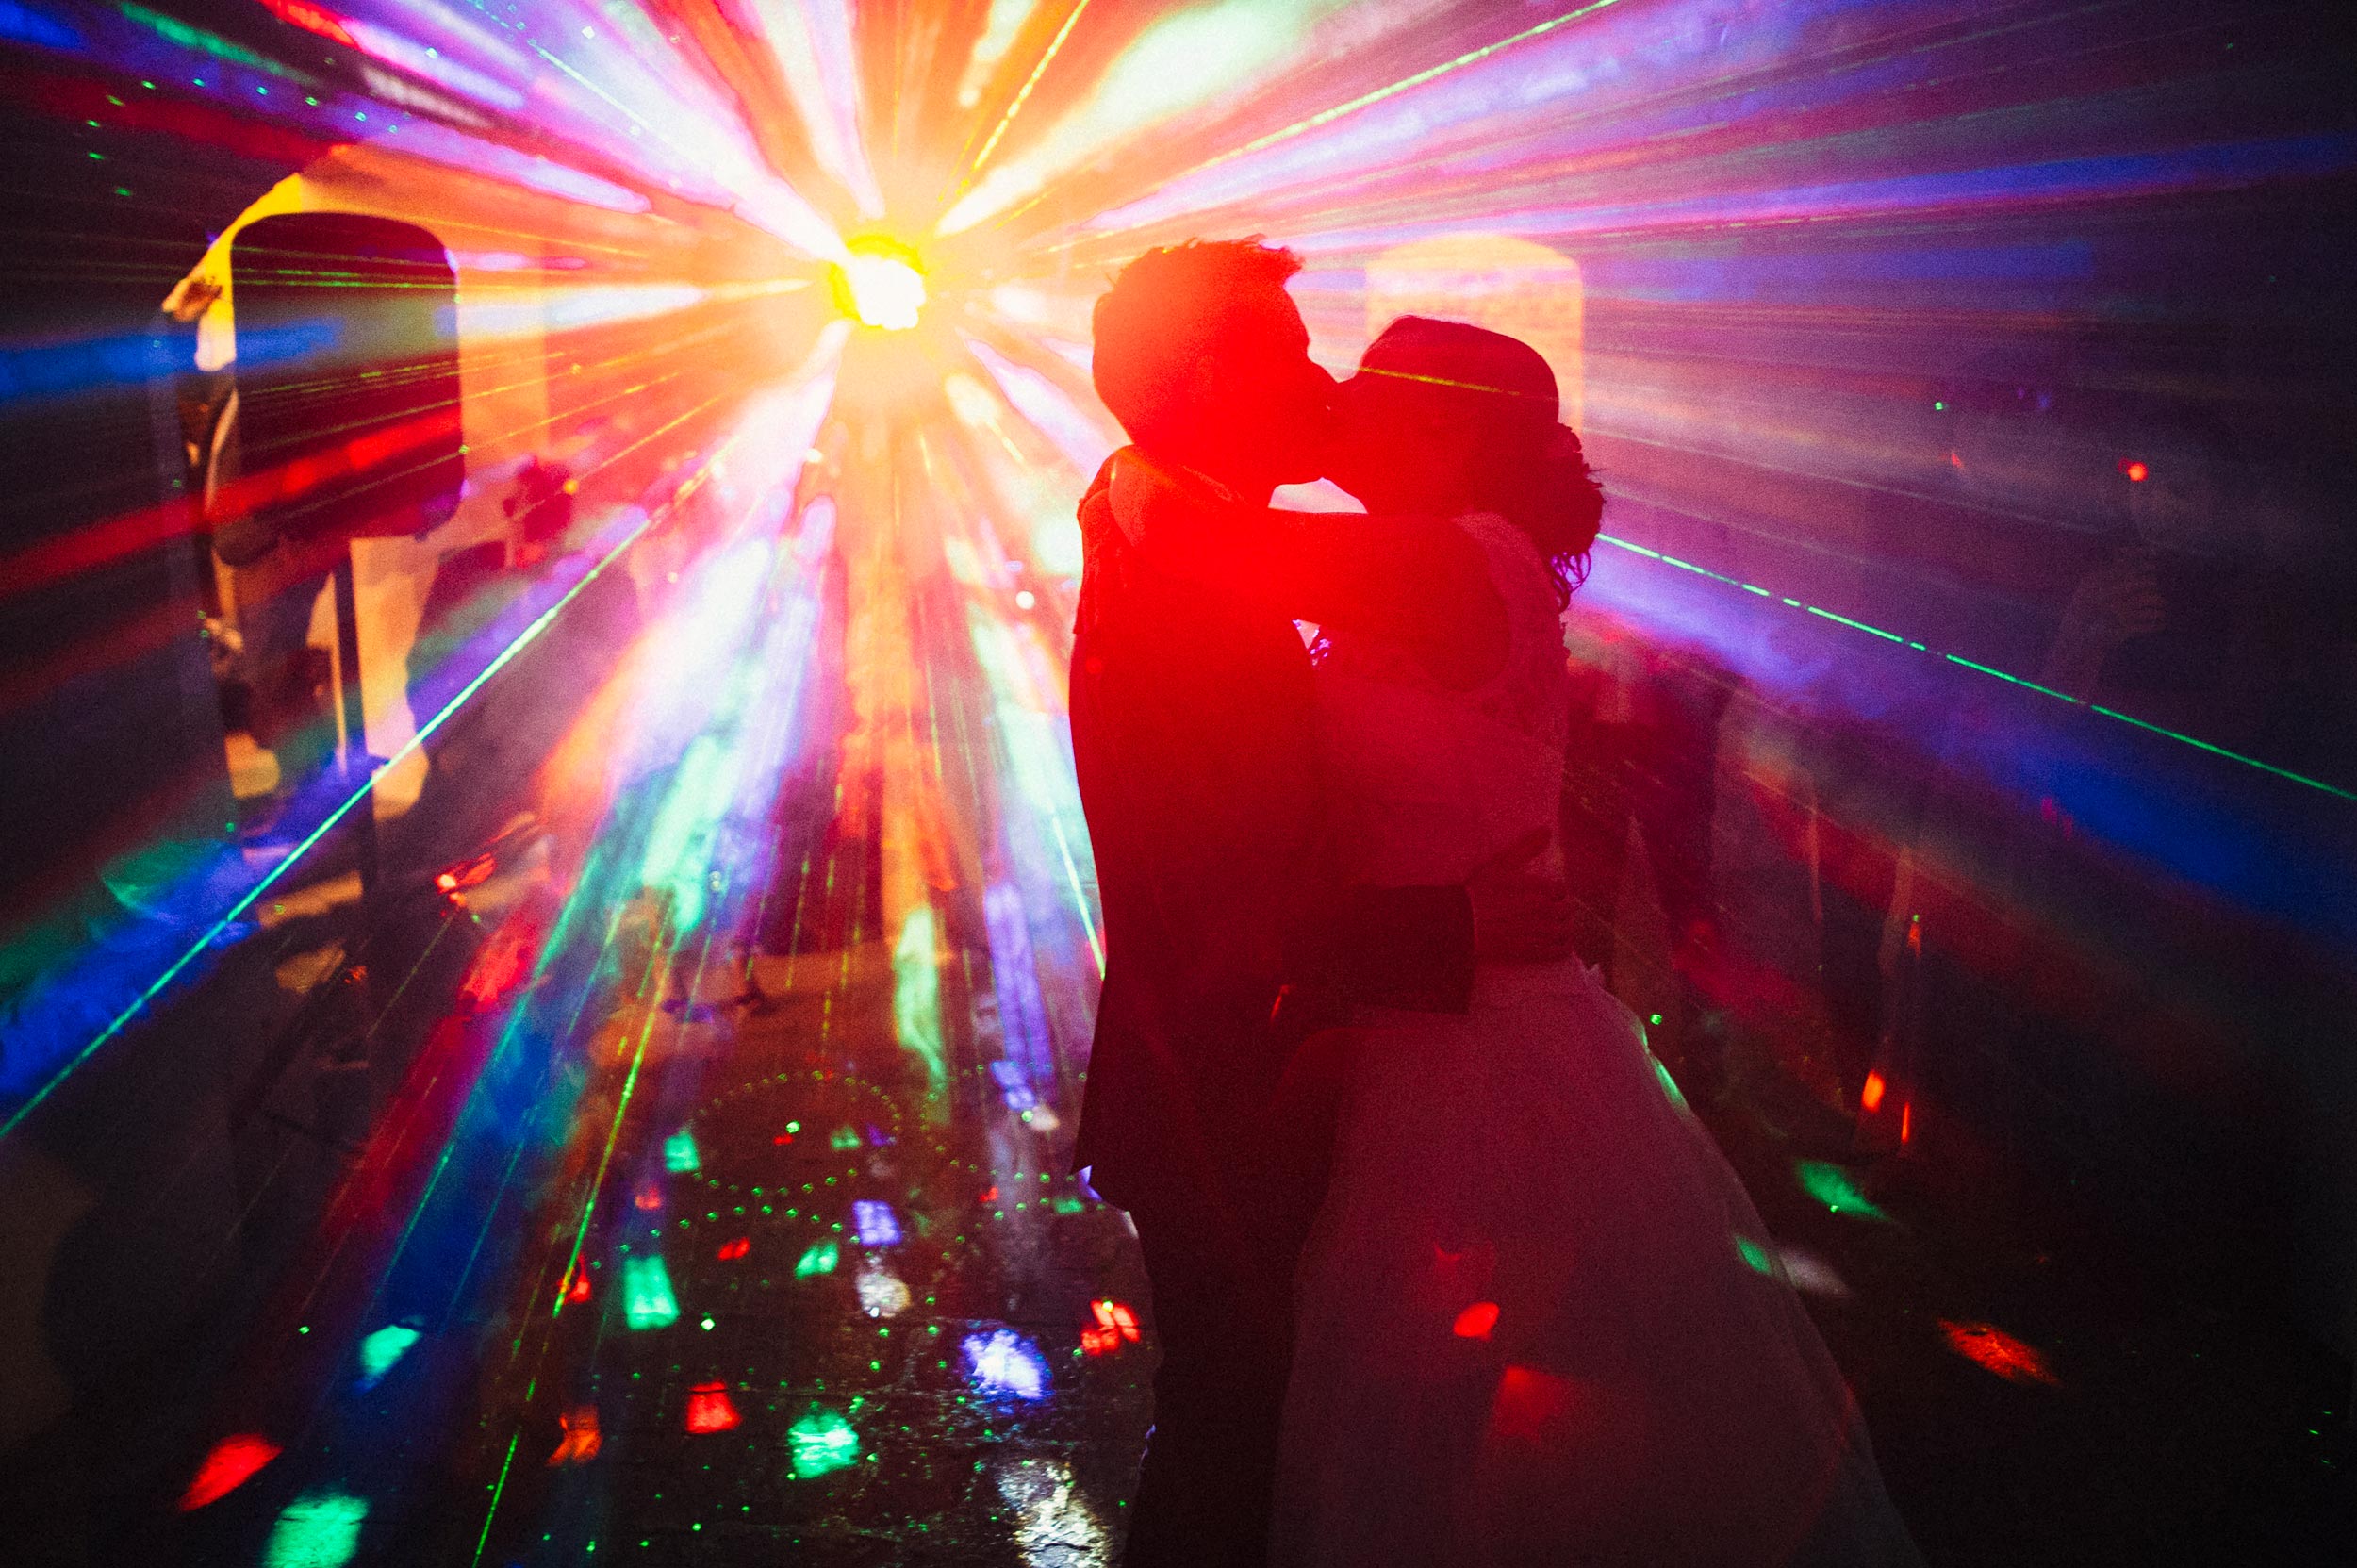 dj-lights-color-flare-strikes-on-the-dancefloor-while-bride-and-groom-kiss-during-the-first-dance-at-wedding.jpg